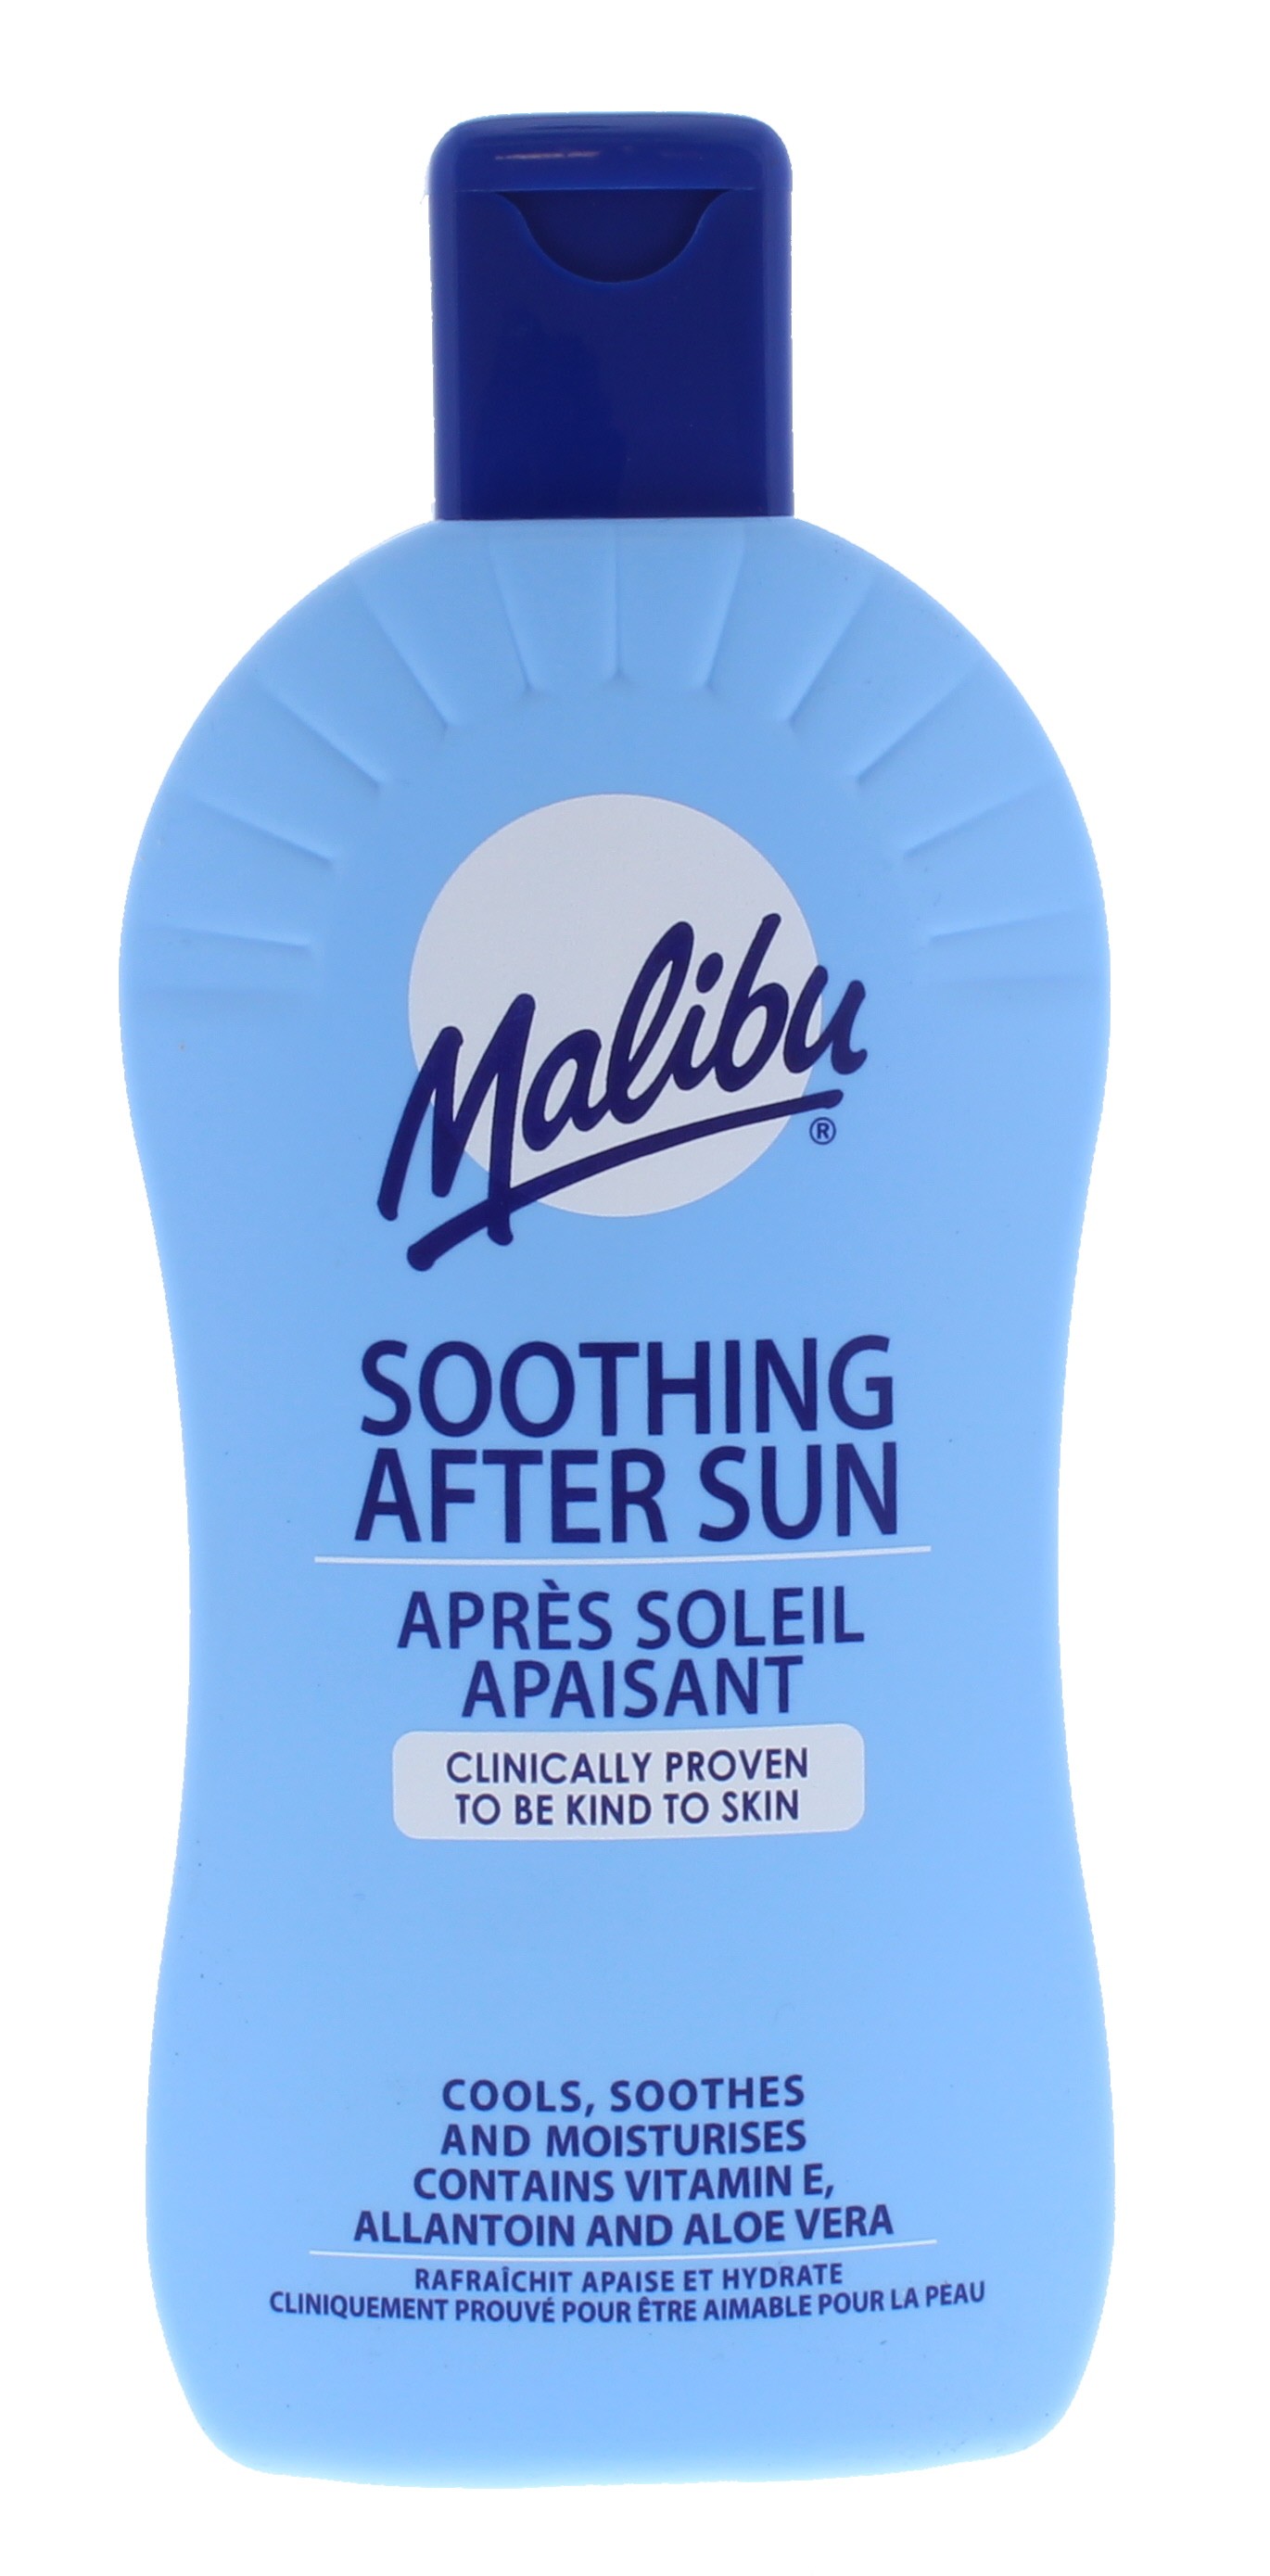 Malibu Soothing After Sun Lotion